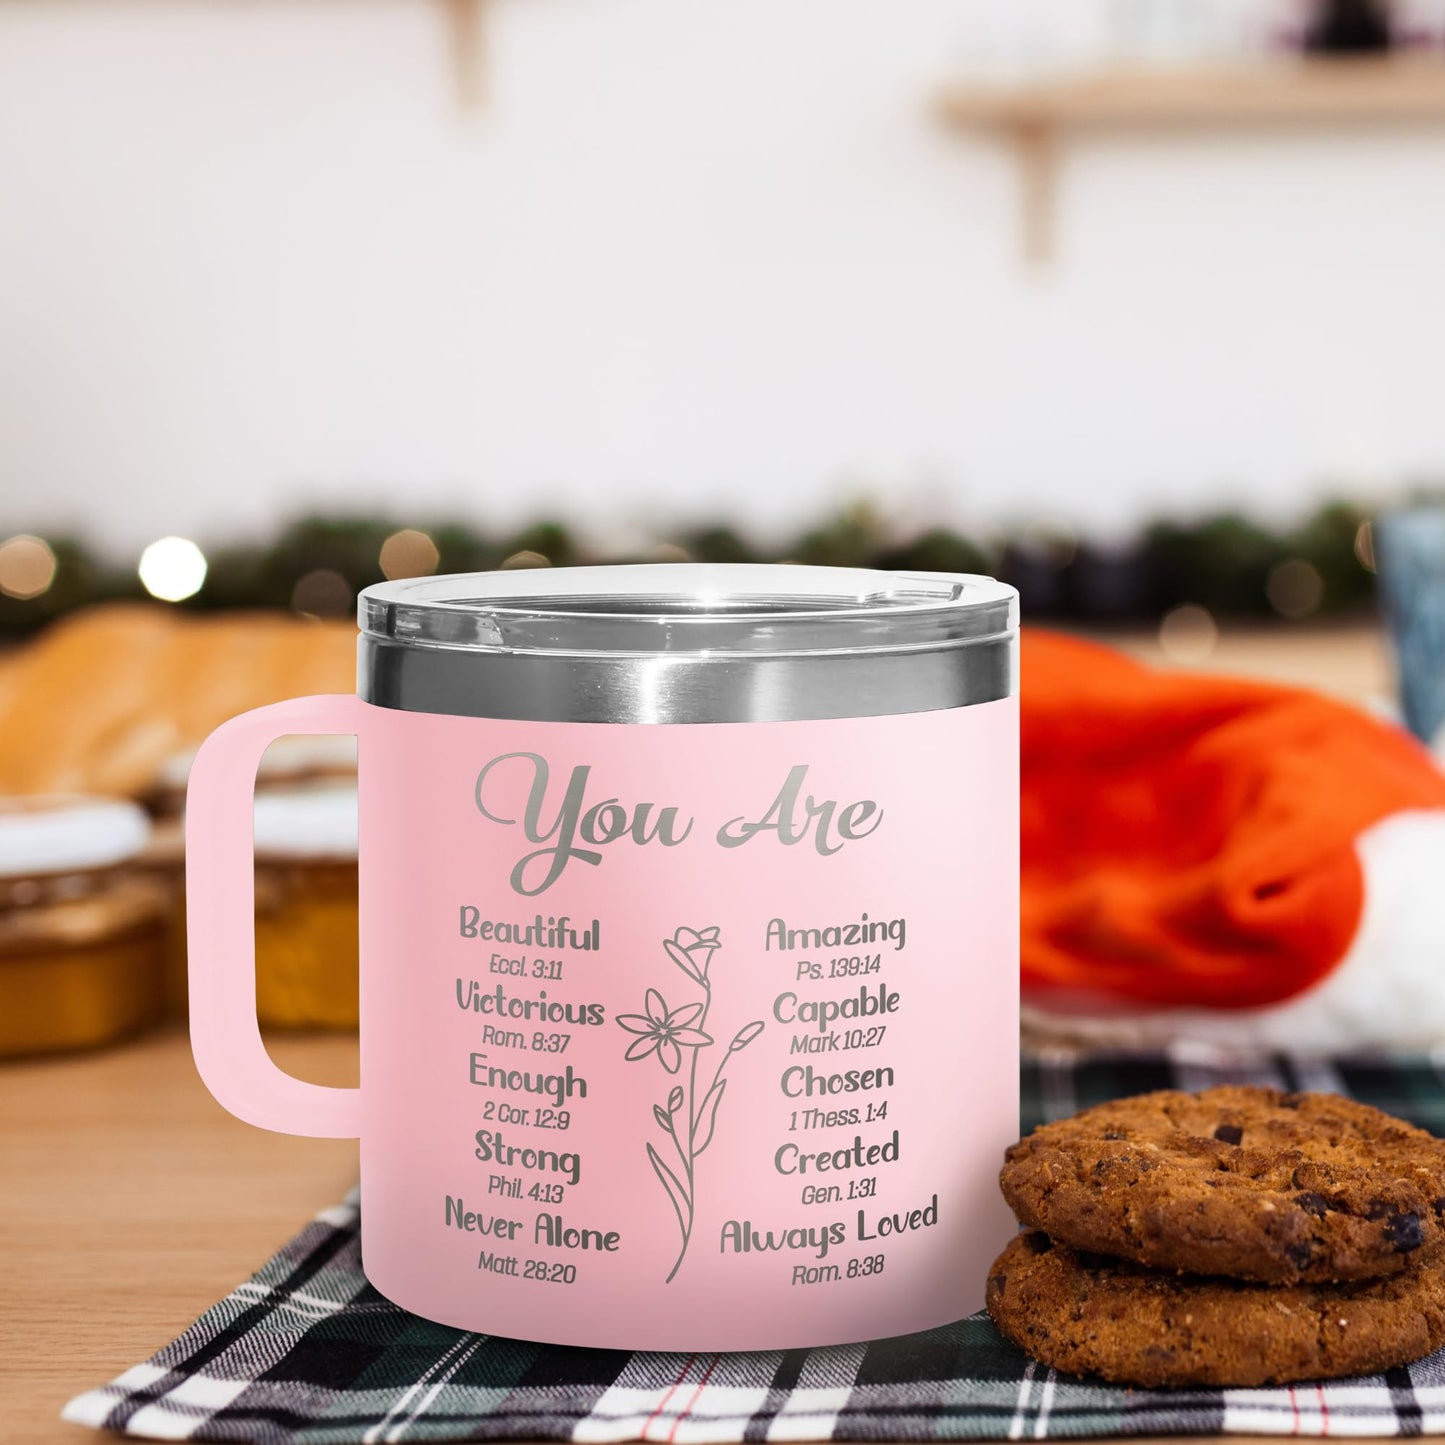 Christian Gifts for Women - Religious Gifts for Women - Birthday Gifts for Mom, Grandma, Sister, Friend, Coworker, Women - Mothers Day Gifts - Inspirational Spiritual Catholic Gifts Women - 14 Oz Mug